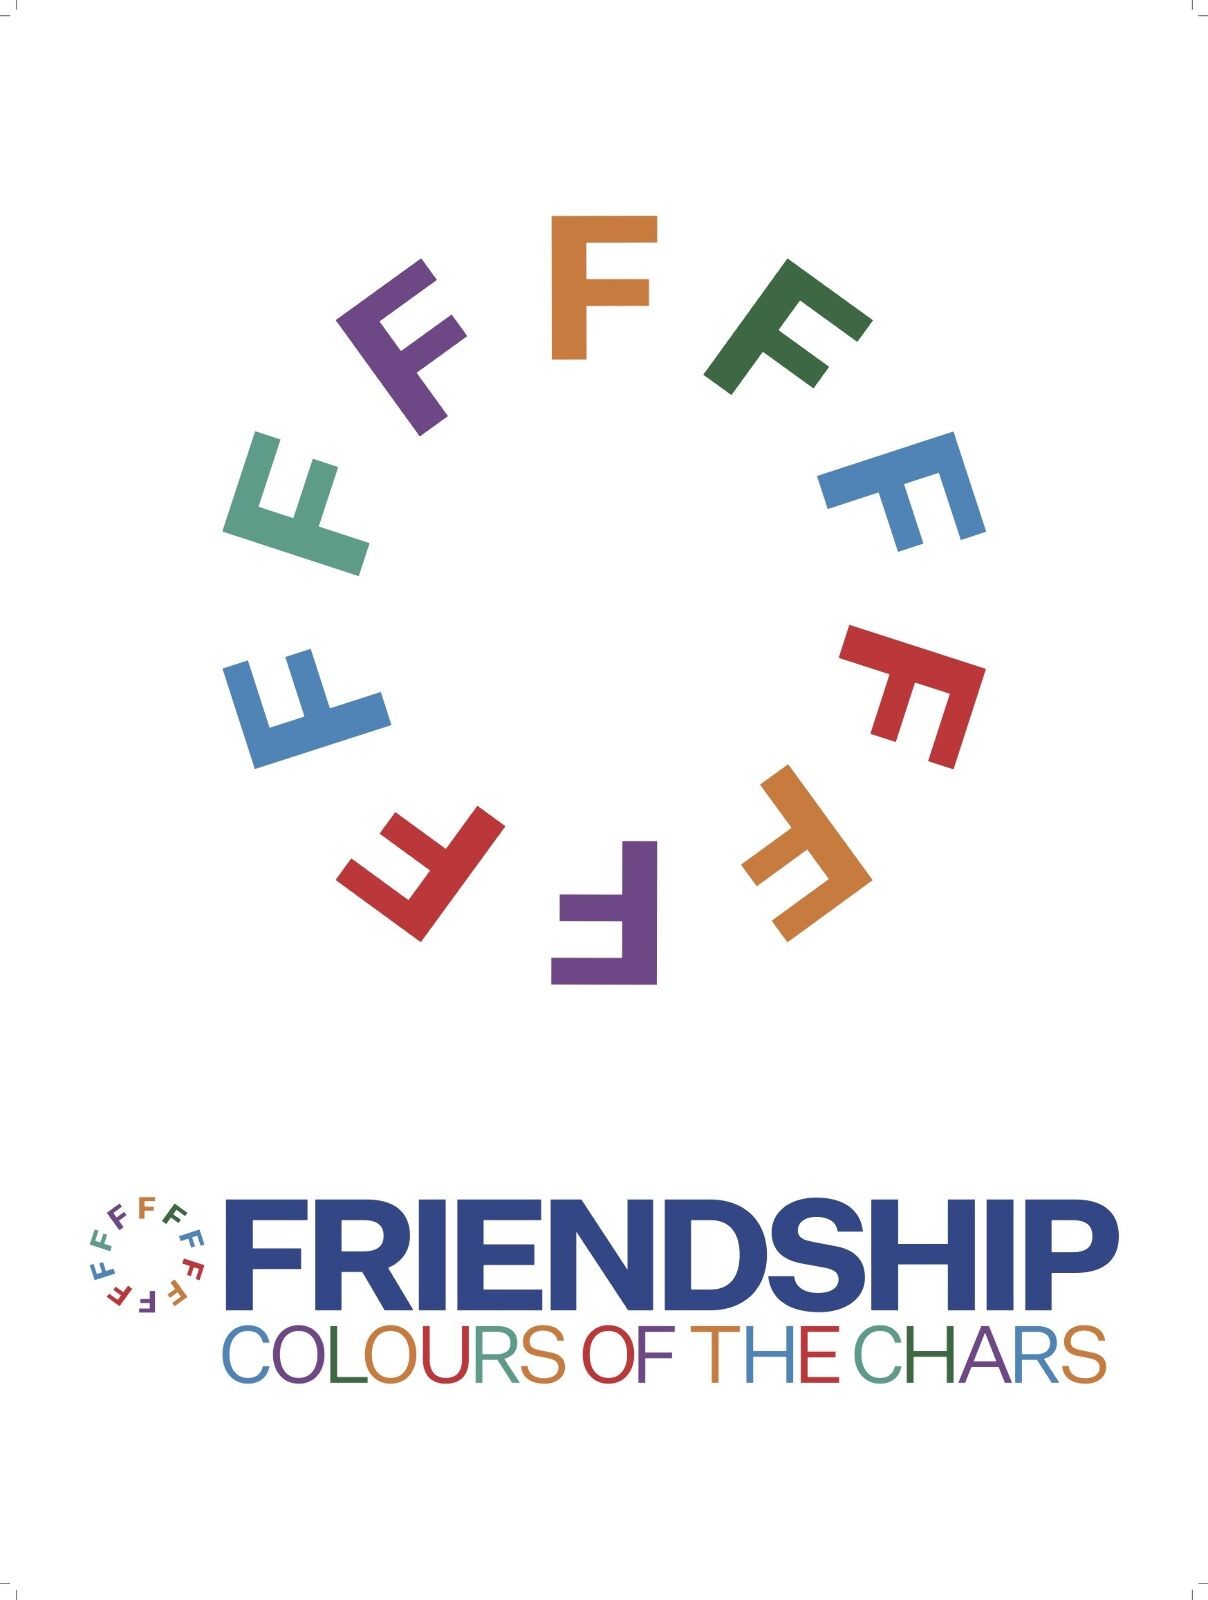 "Friendship Colours of the Chars"